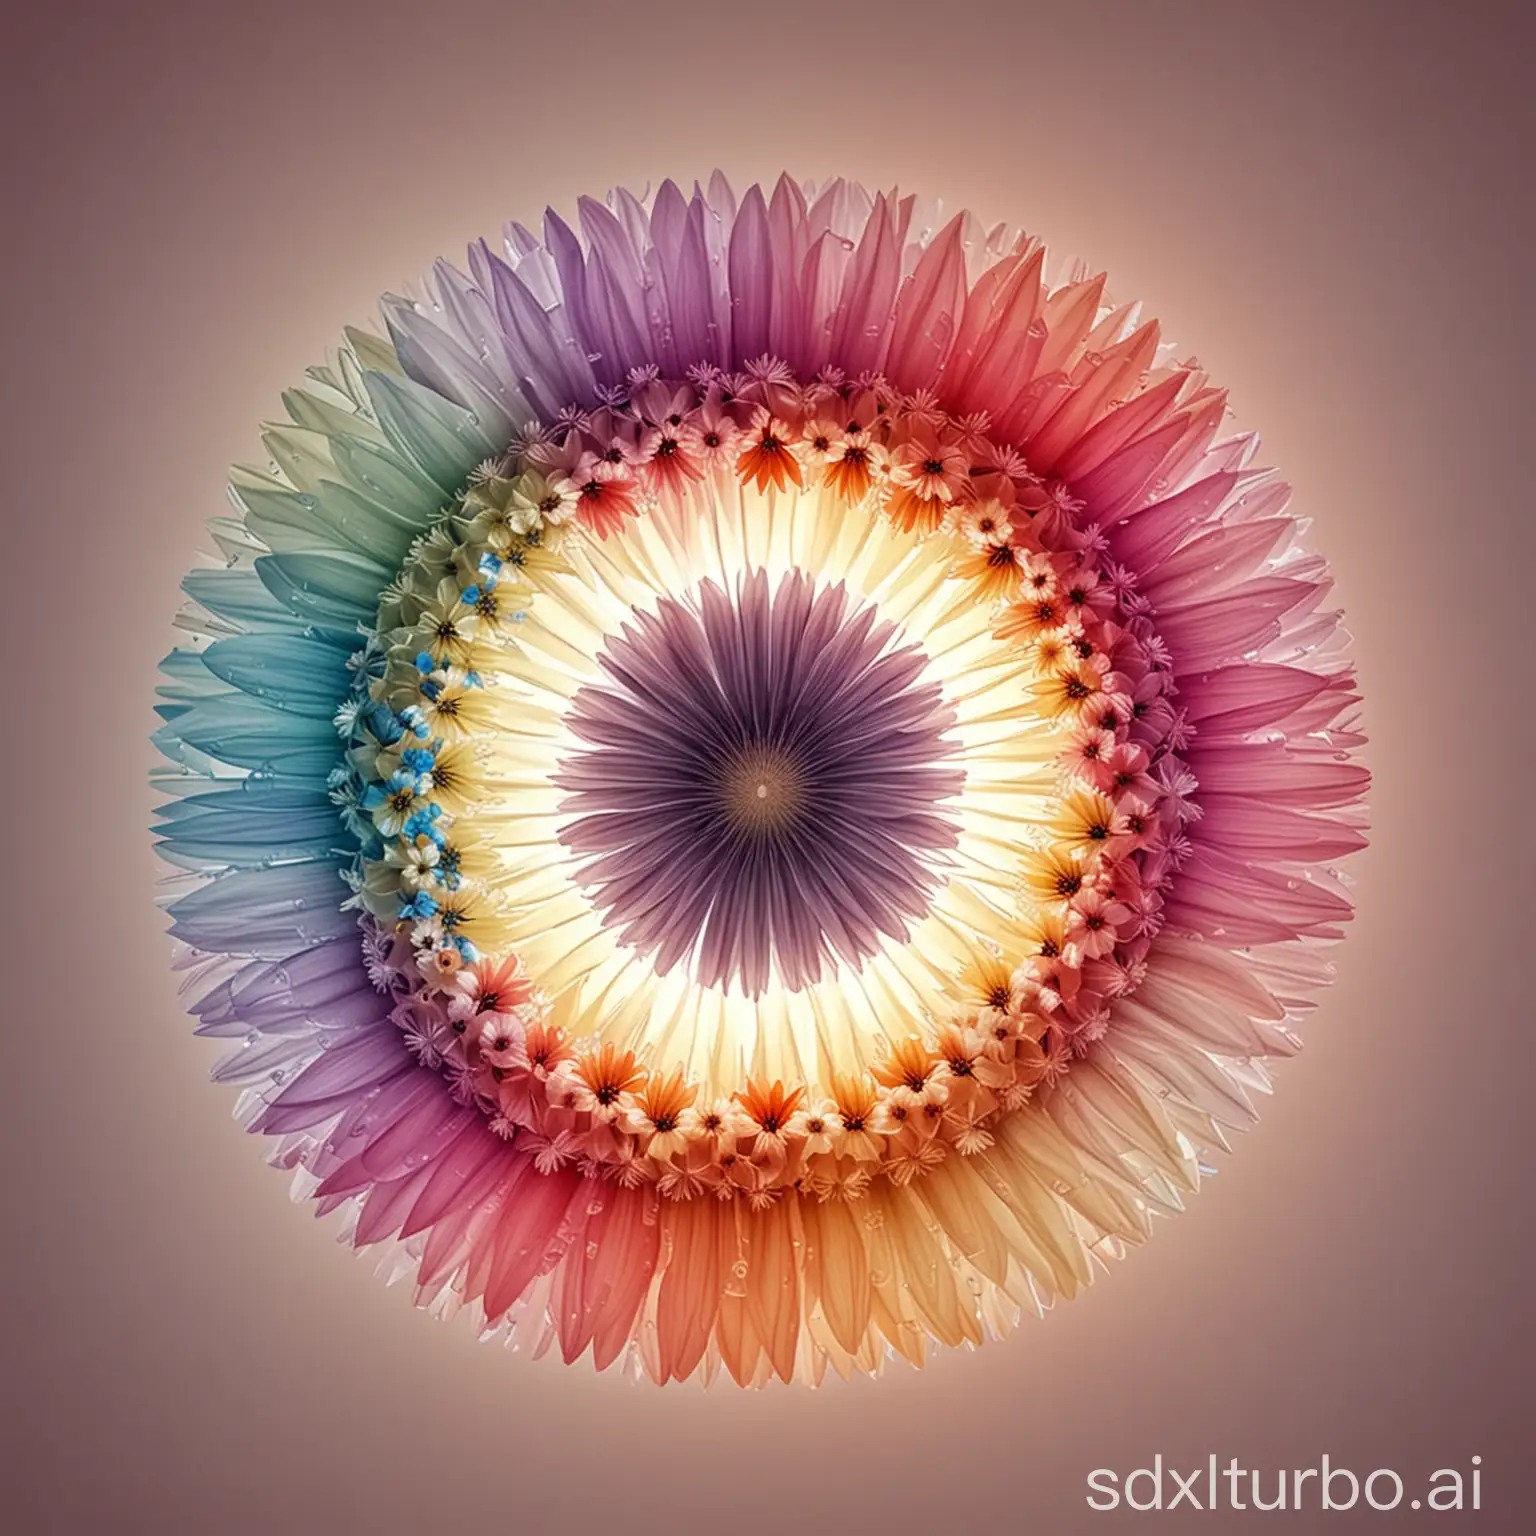 Abstract-Radial-Flower-Composition-with-Translucent-Colors